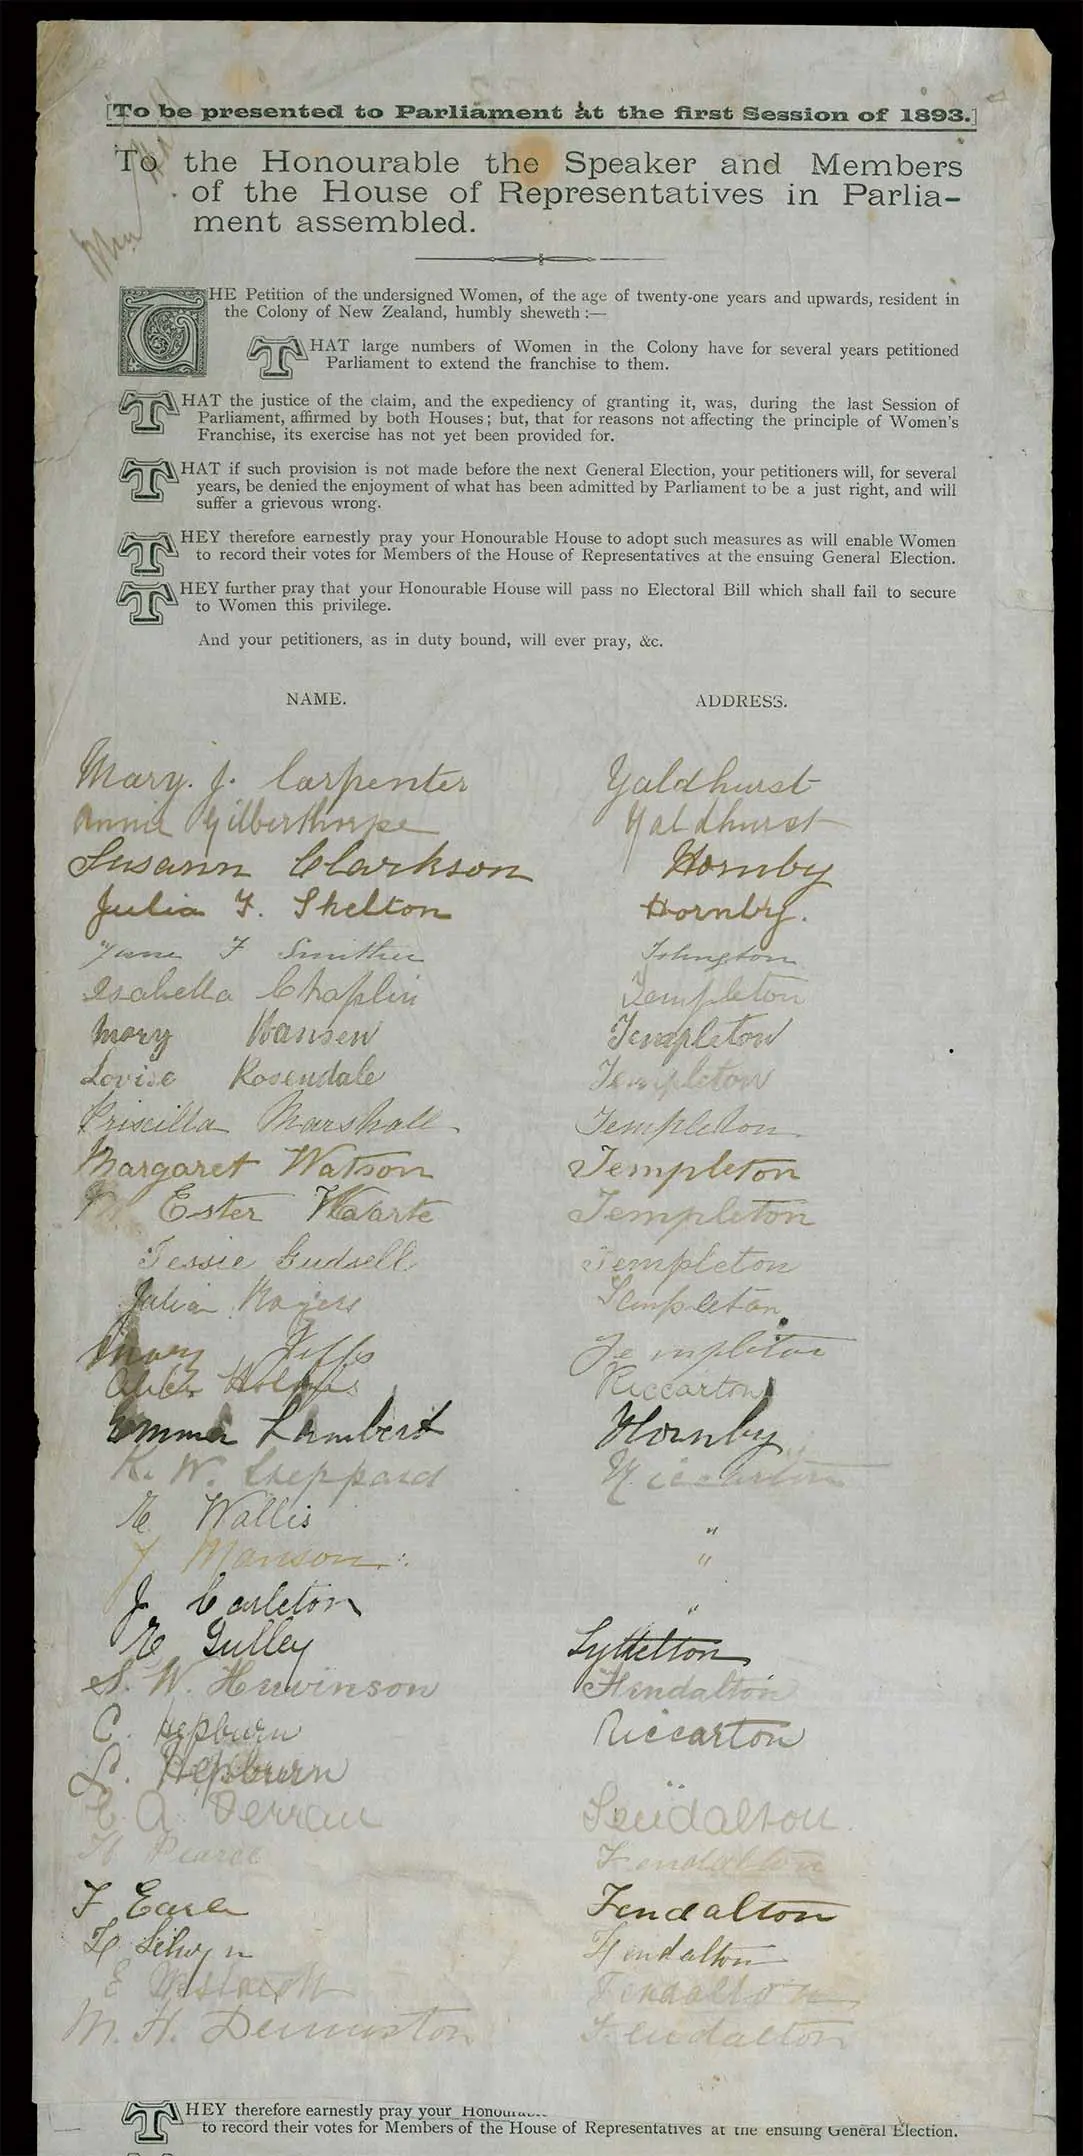 The first sheet of the Women’s Suffrage Petition | Te Petihana Whakamana Pōti Wahine. At the top is the petition's address to Parliament. Below the address is a list of handwritten signatures including the signatories’ names and addresses.